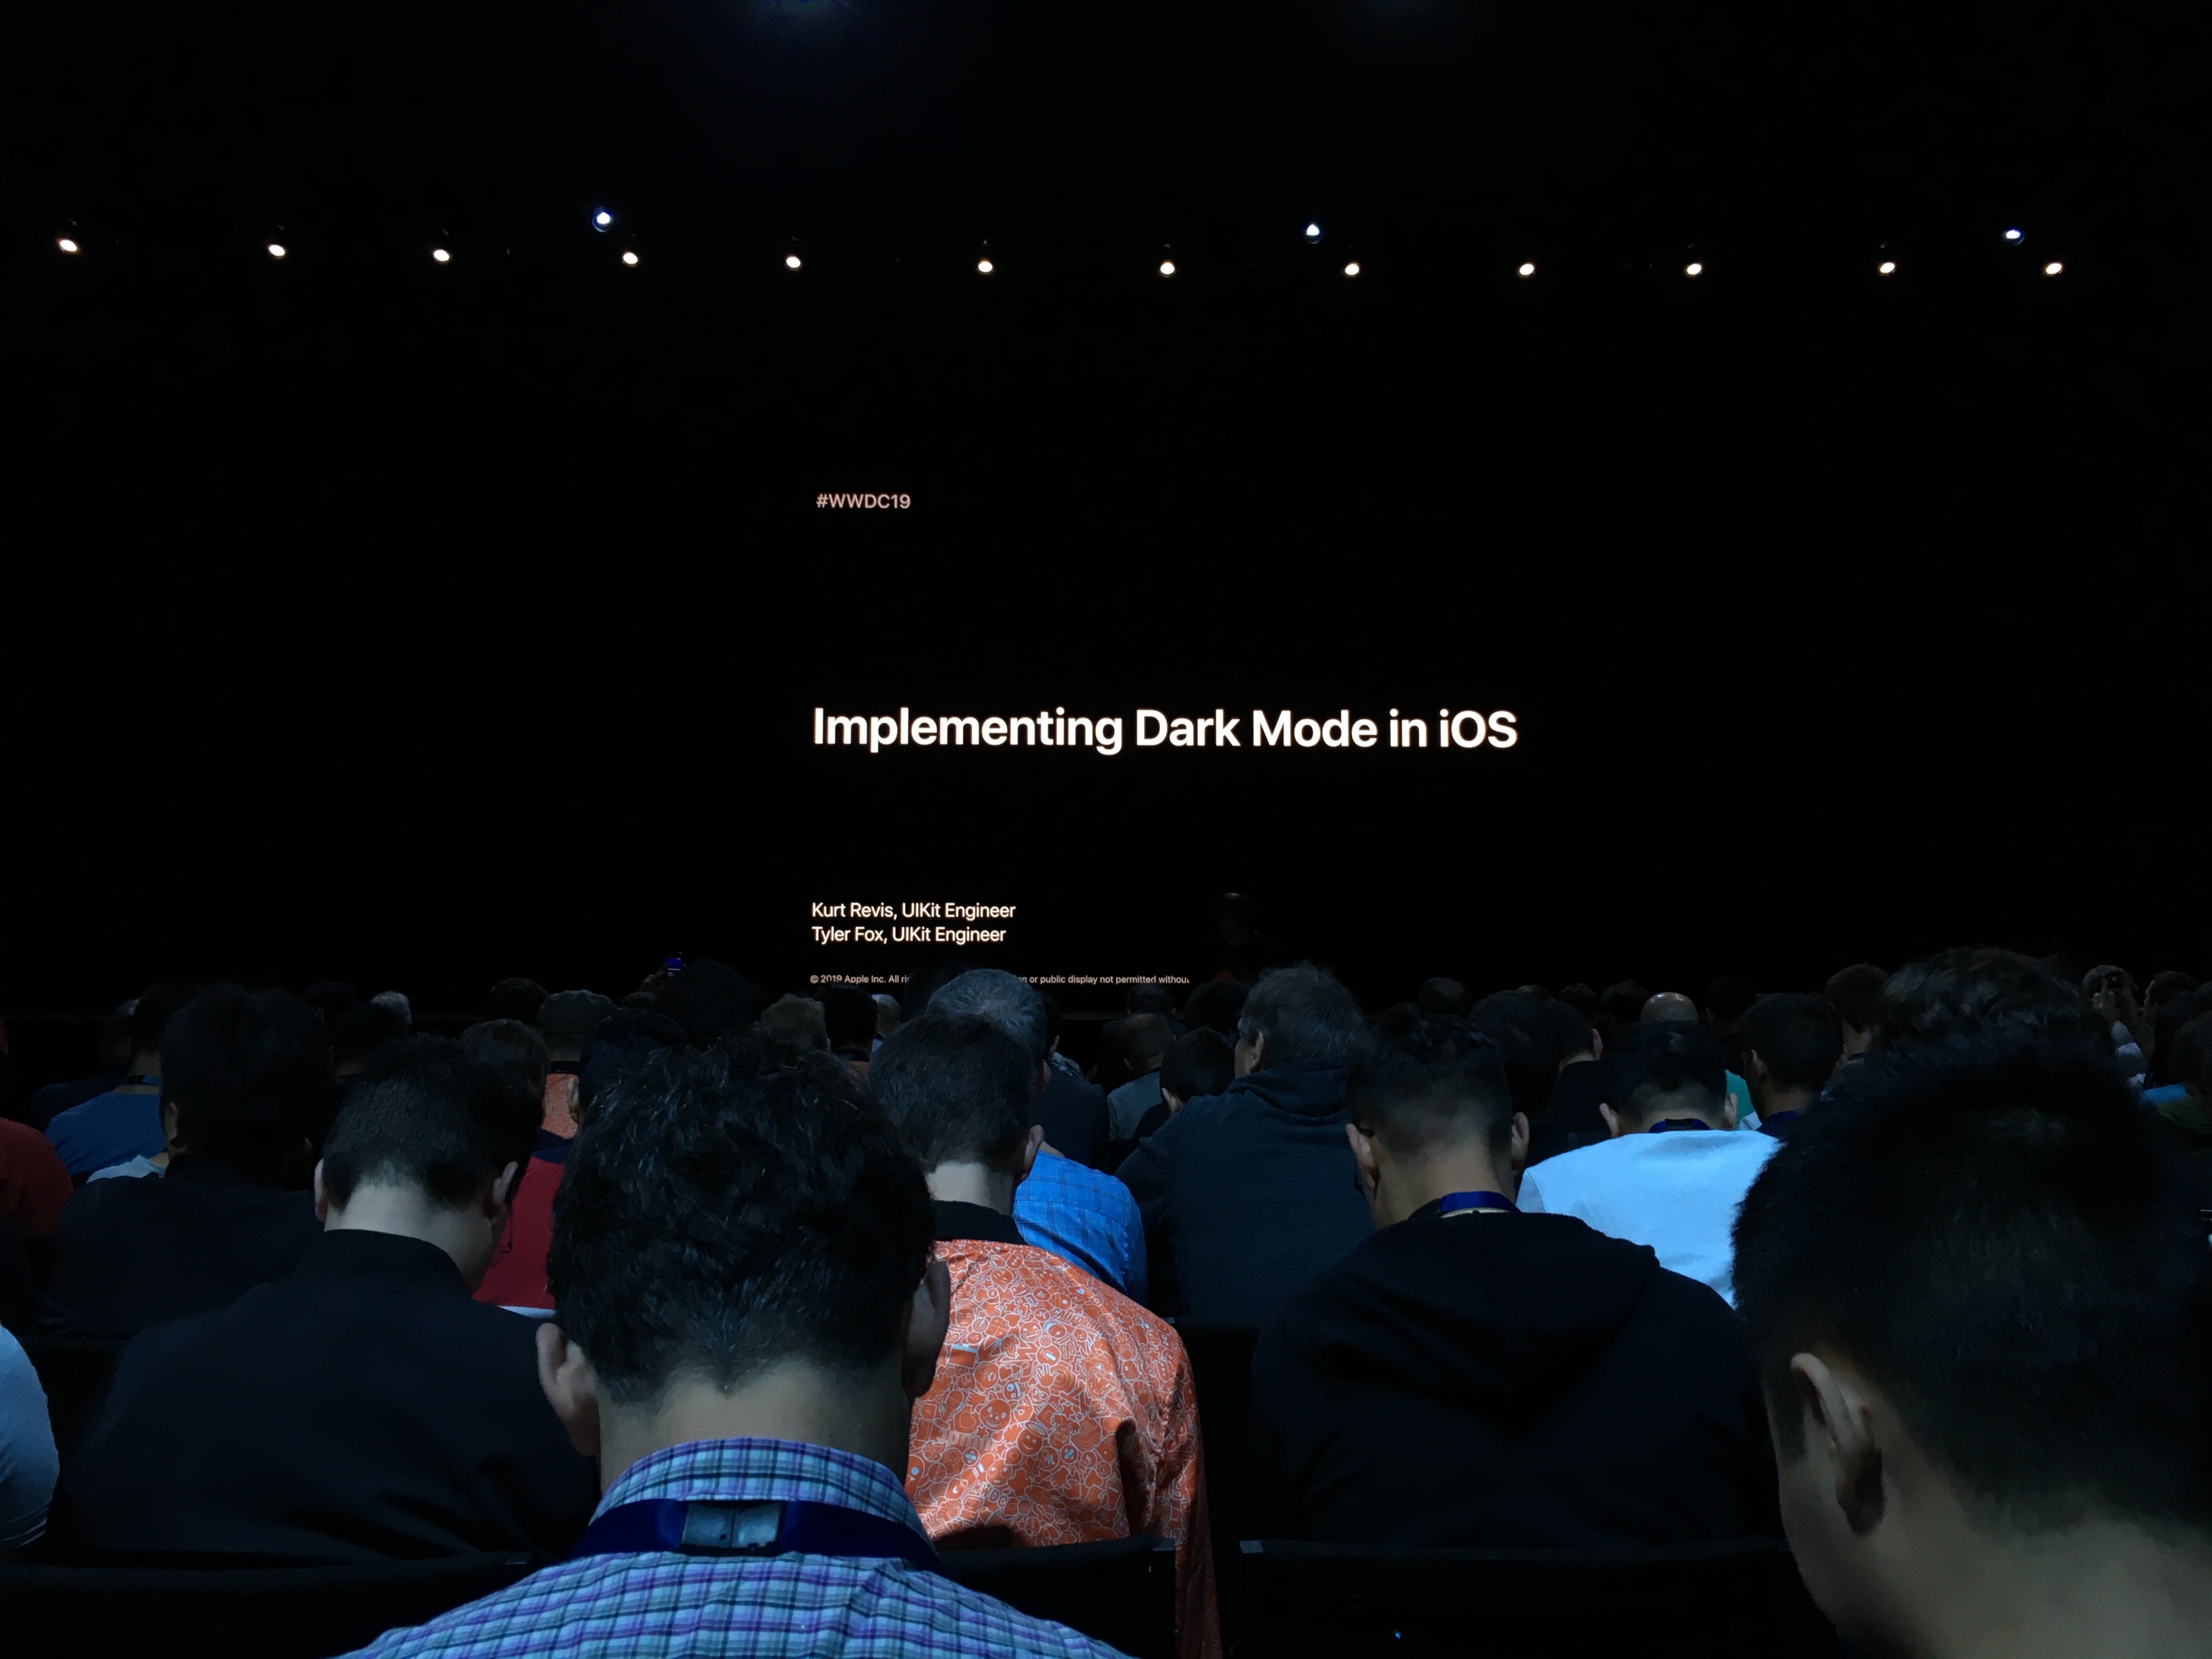 WWDC Session called Implementing Dark Mode in iOS